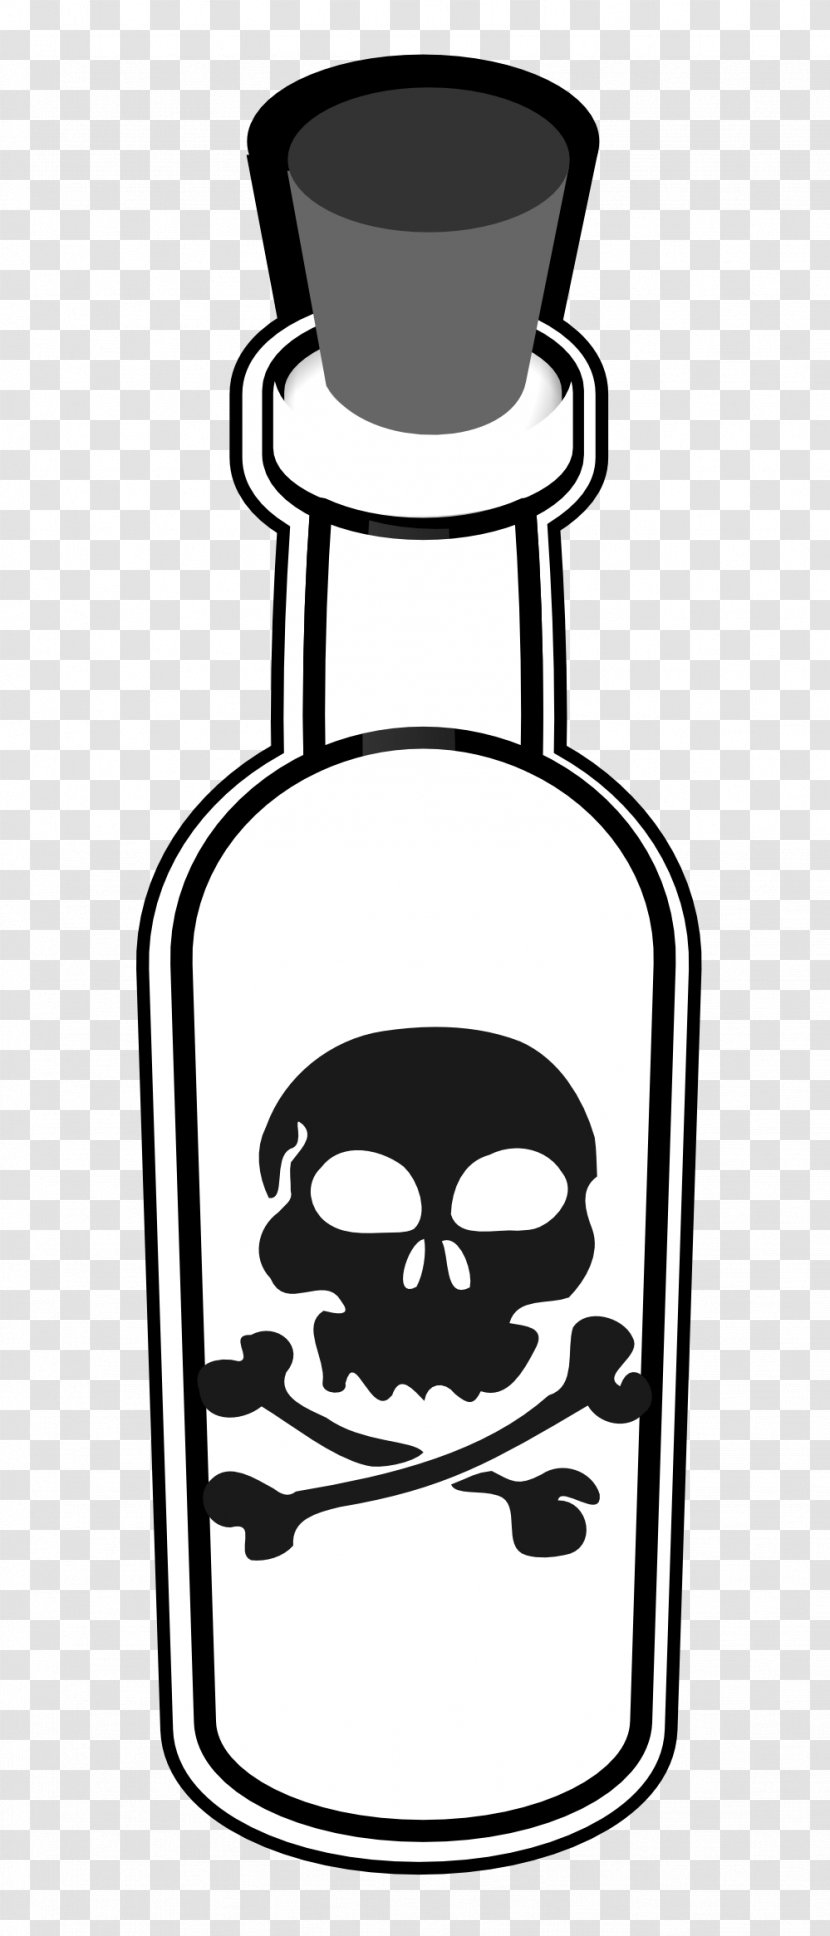 Poisoning Free Content Clip Art - Drawing - Poison Pictures Transparent PNG